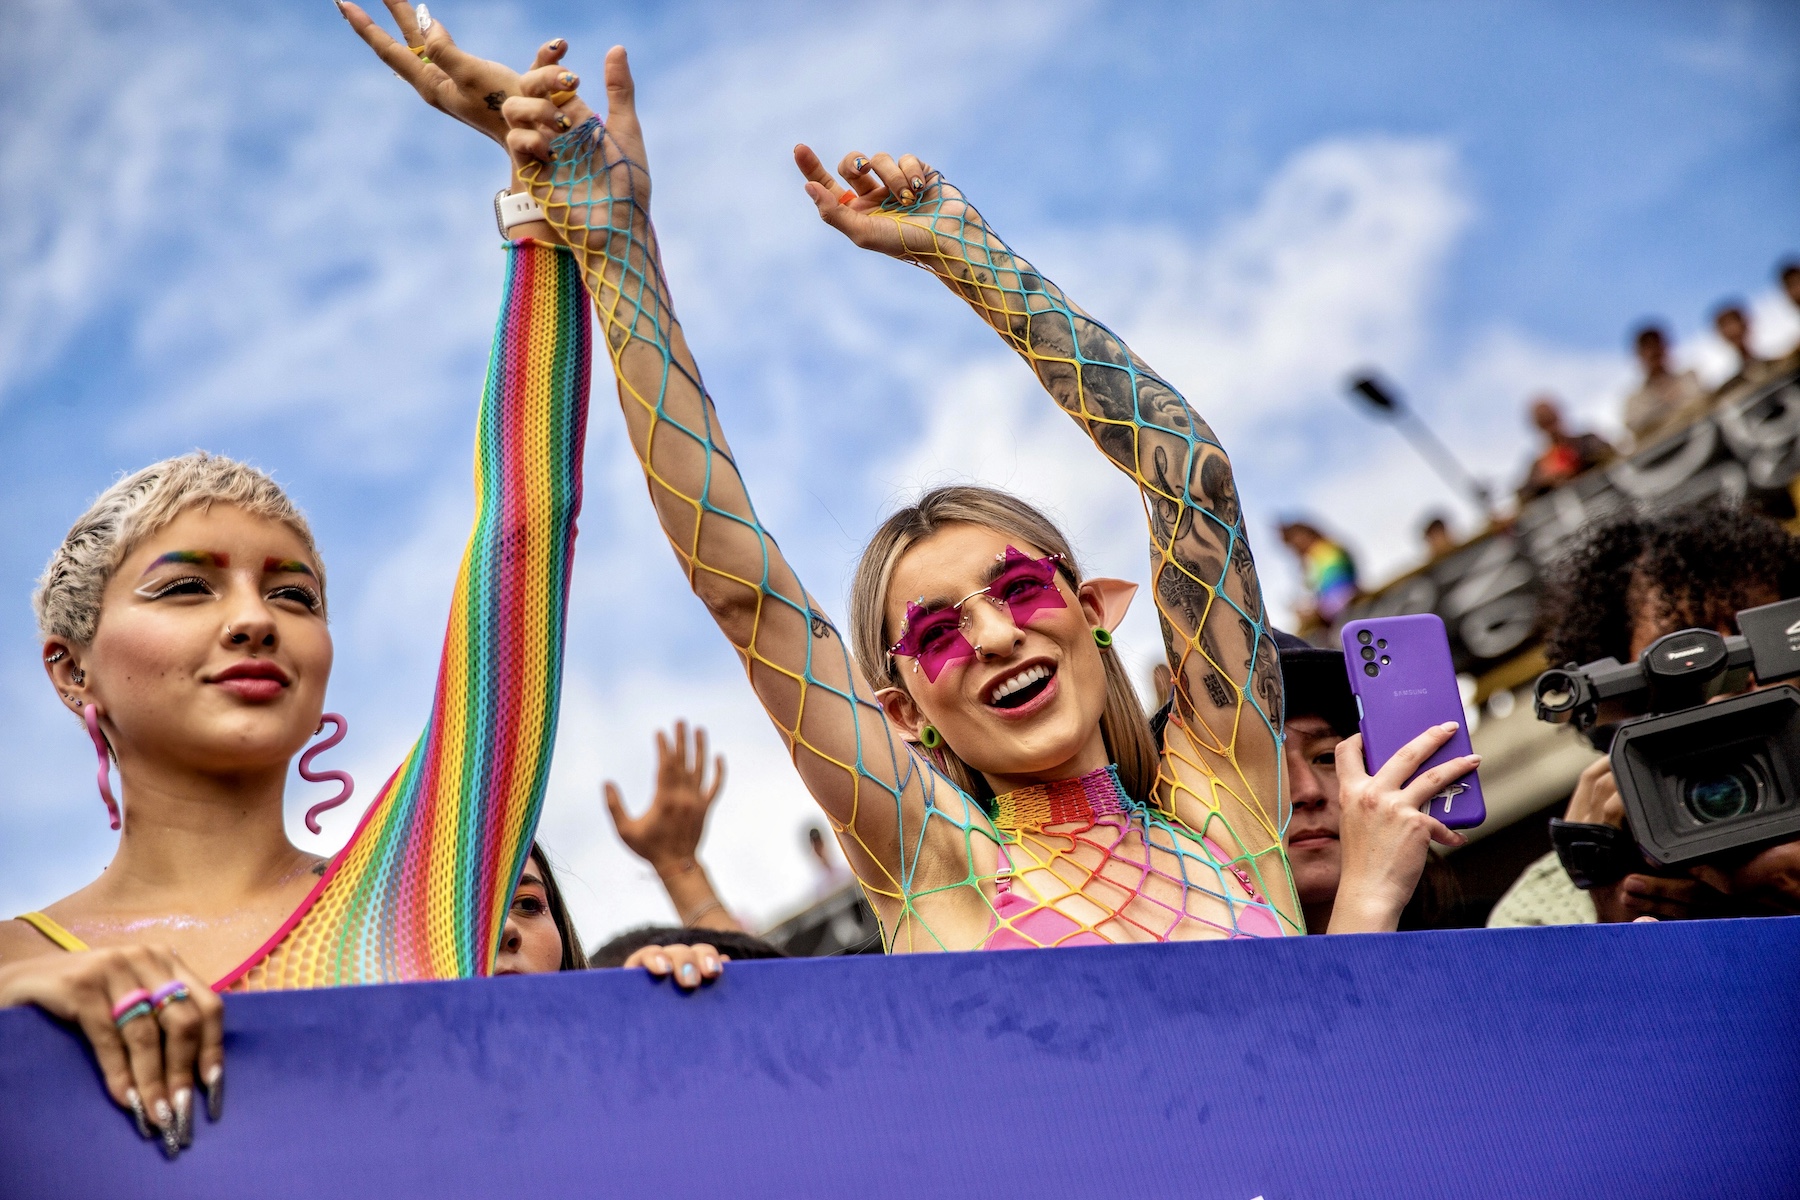 More Than 100,000 People In Colombia Held Its Biggest Ever Pride Parade To Celebrate LGBTQ Rights